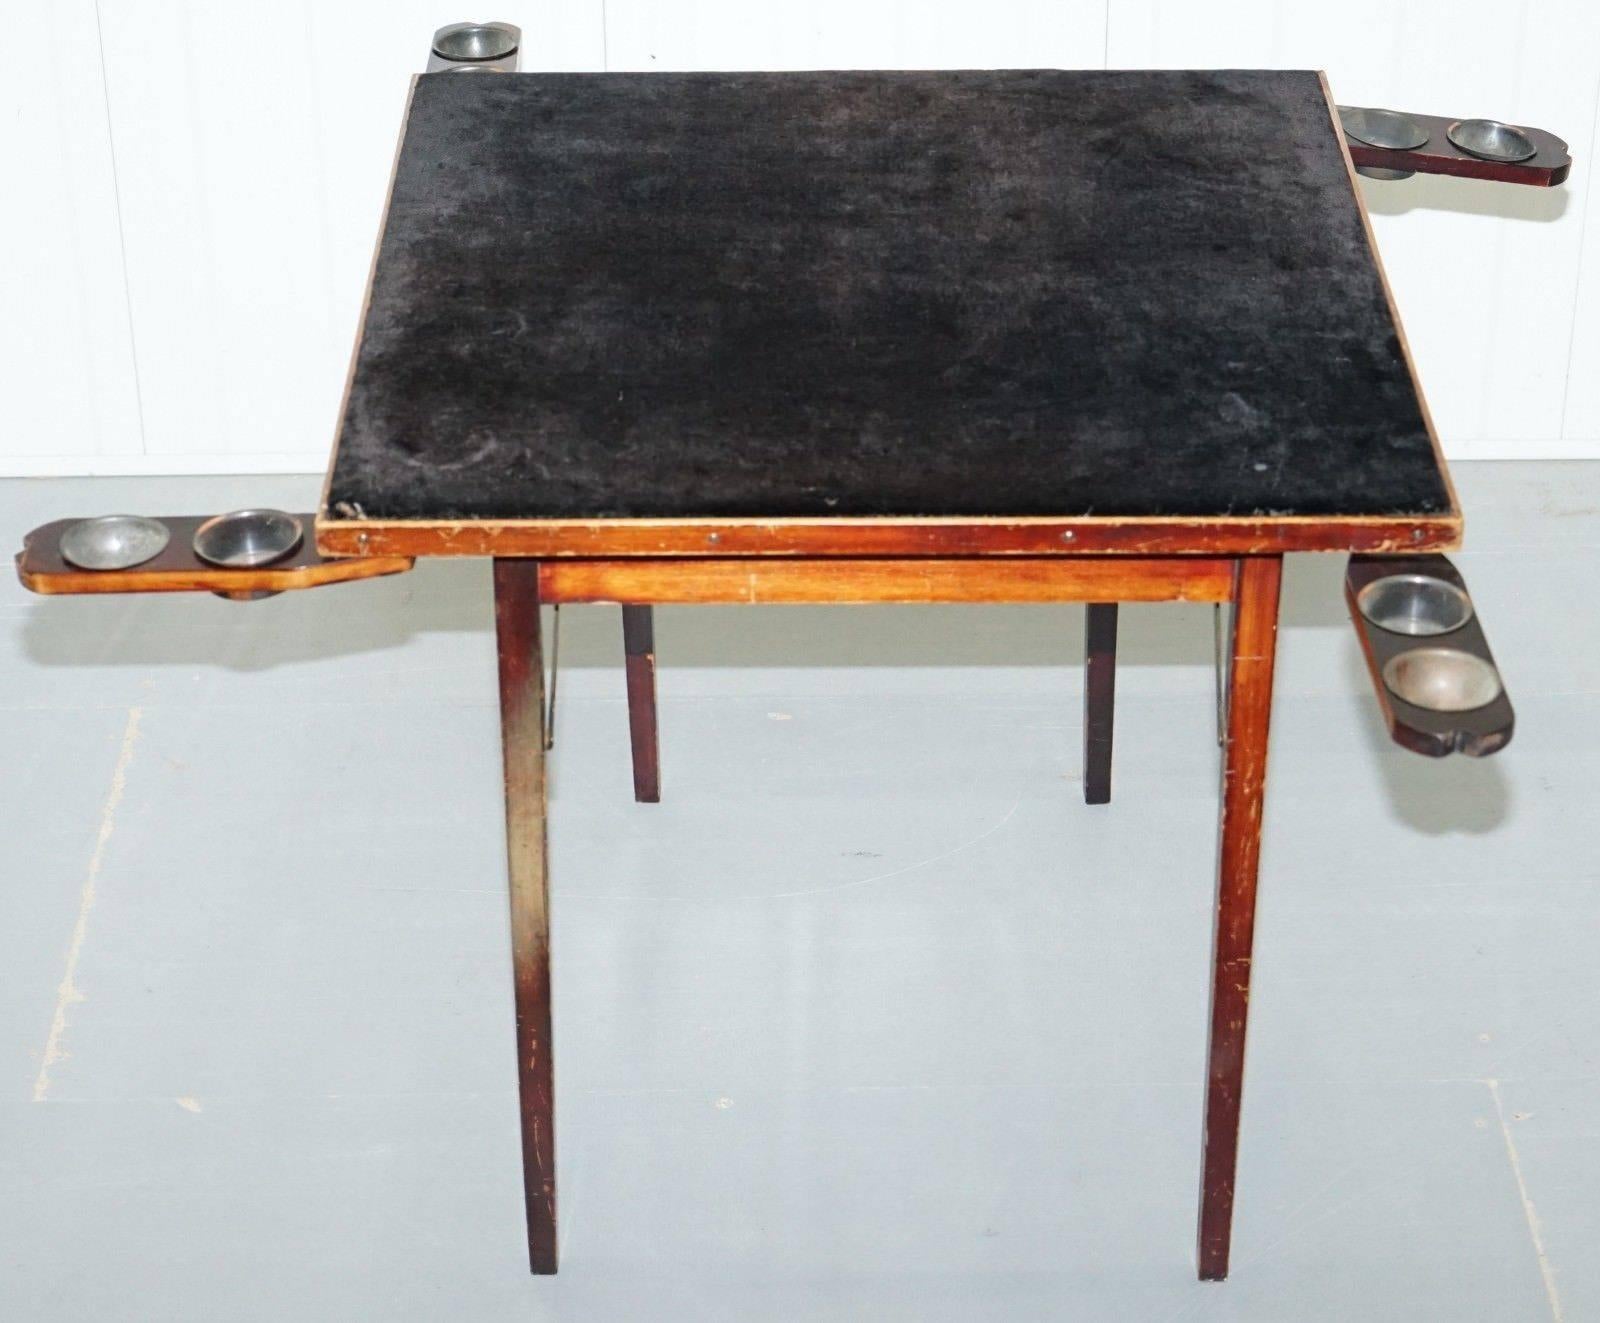 We are delighted to offer for sale this very nice and functional Edwardian Mahogany folding card table

A very good looking well made and decorative piece in unrestored condition, the velvet finish top is in good order with some light distressing